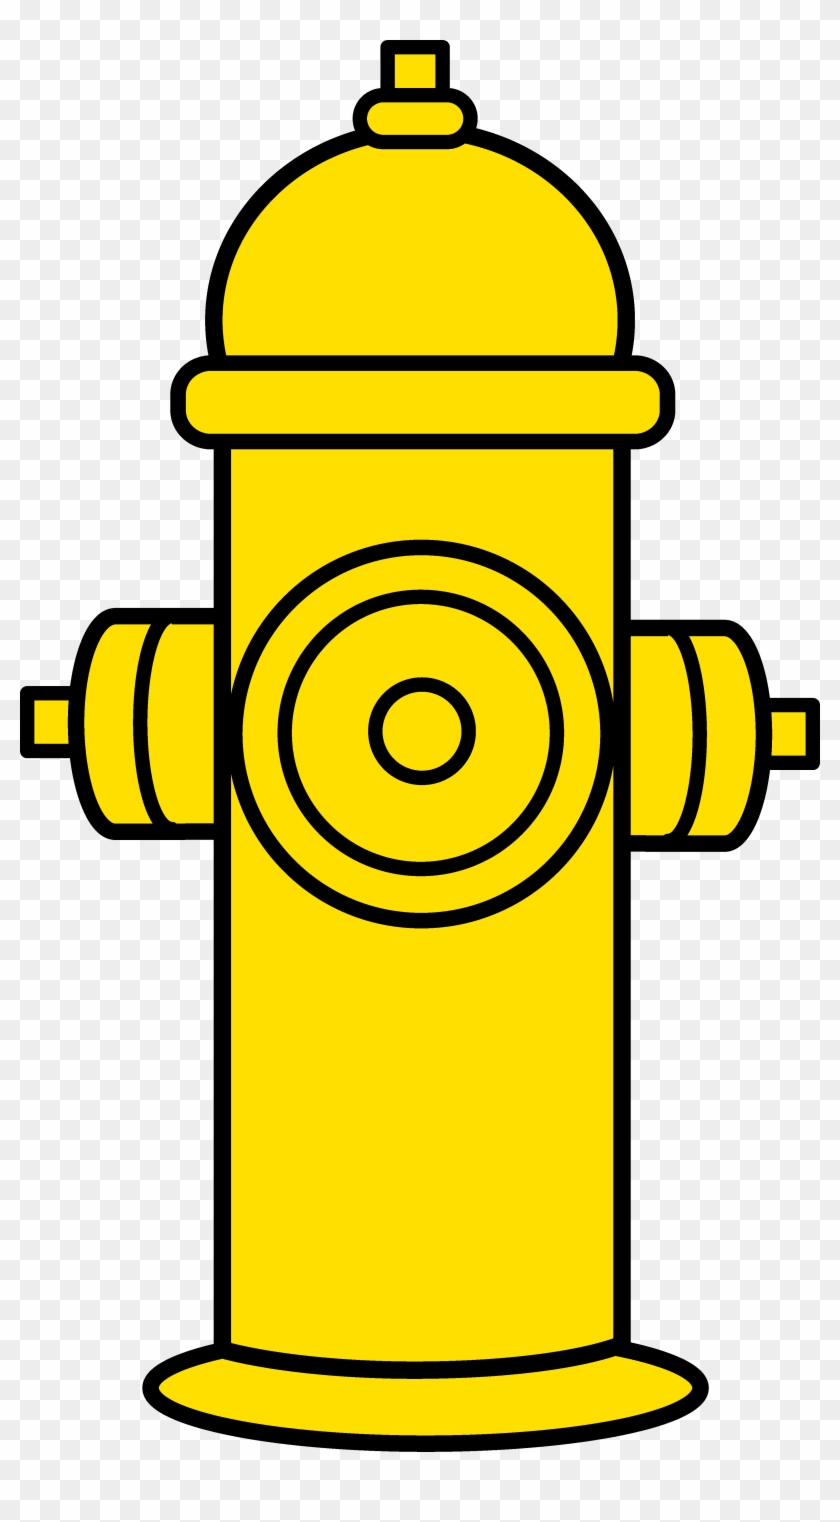 Yellow Fire Hydrant Clipart - Fire Hydrant Clipart #401653